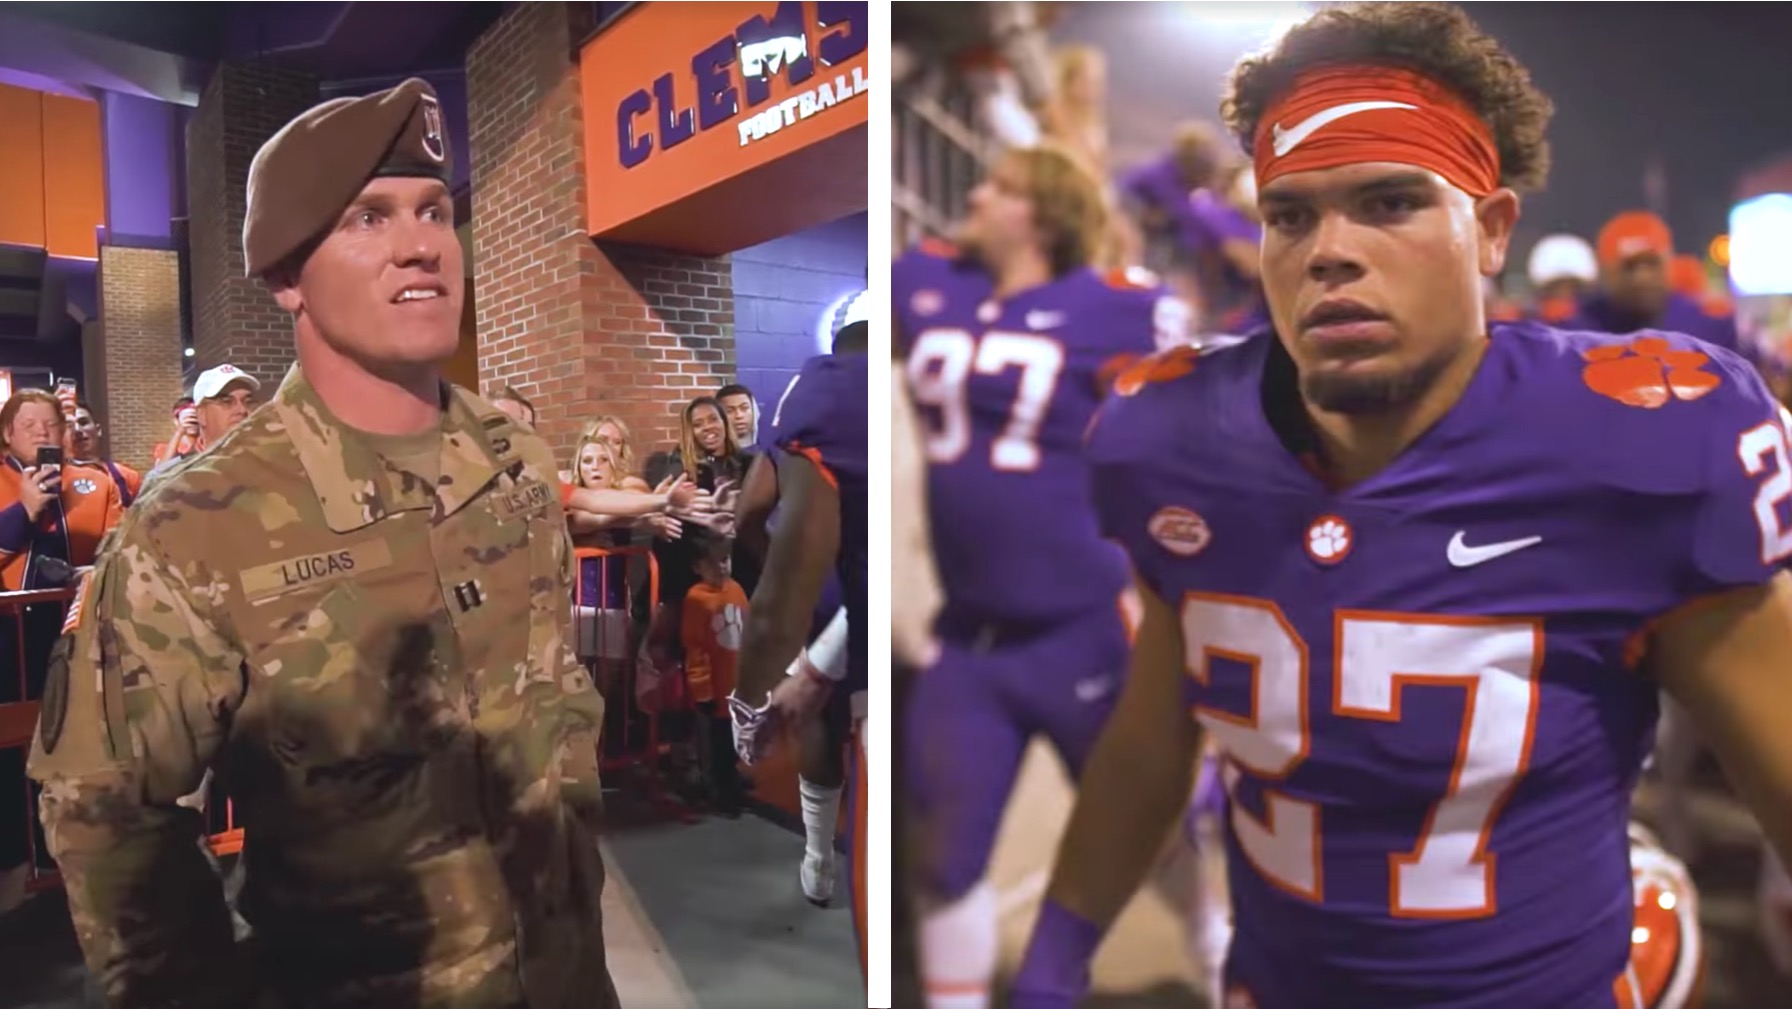 Army Dad Surprises Football Playing Son at His Game [WATCH]